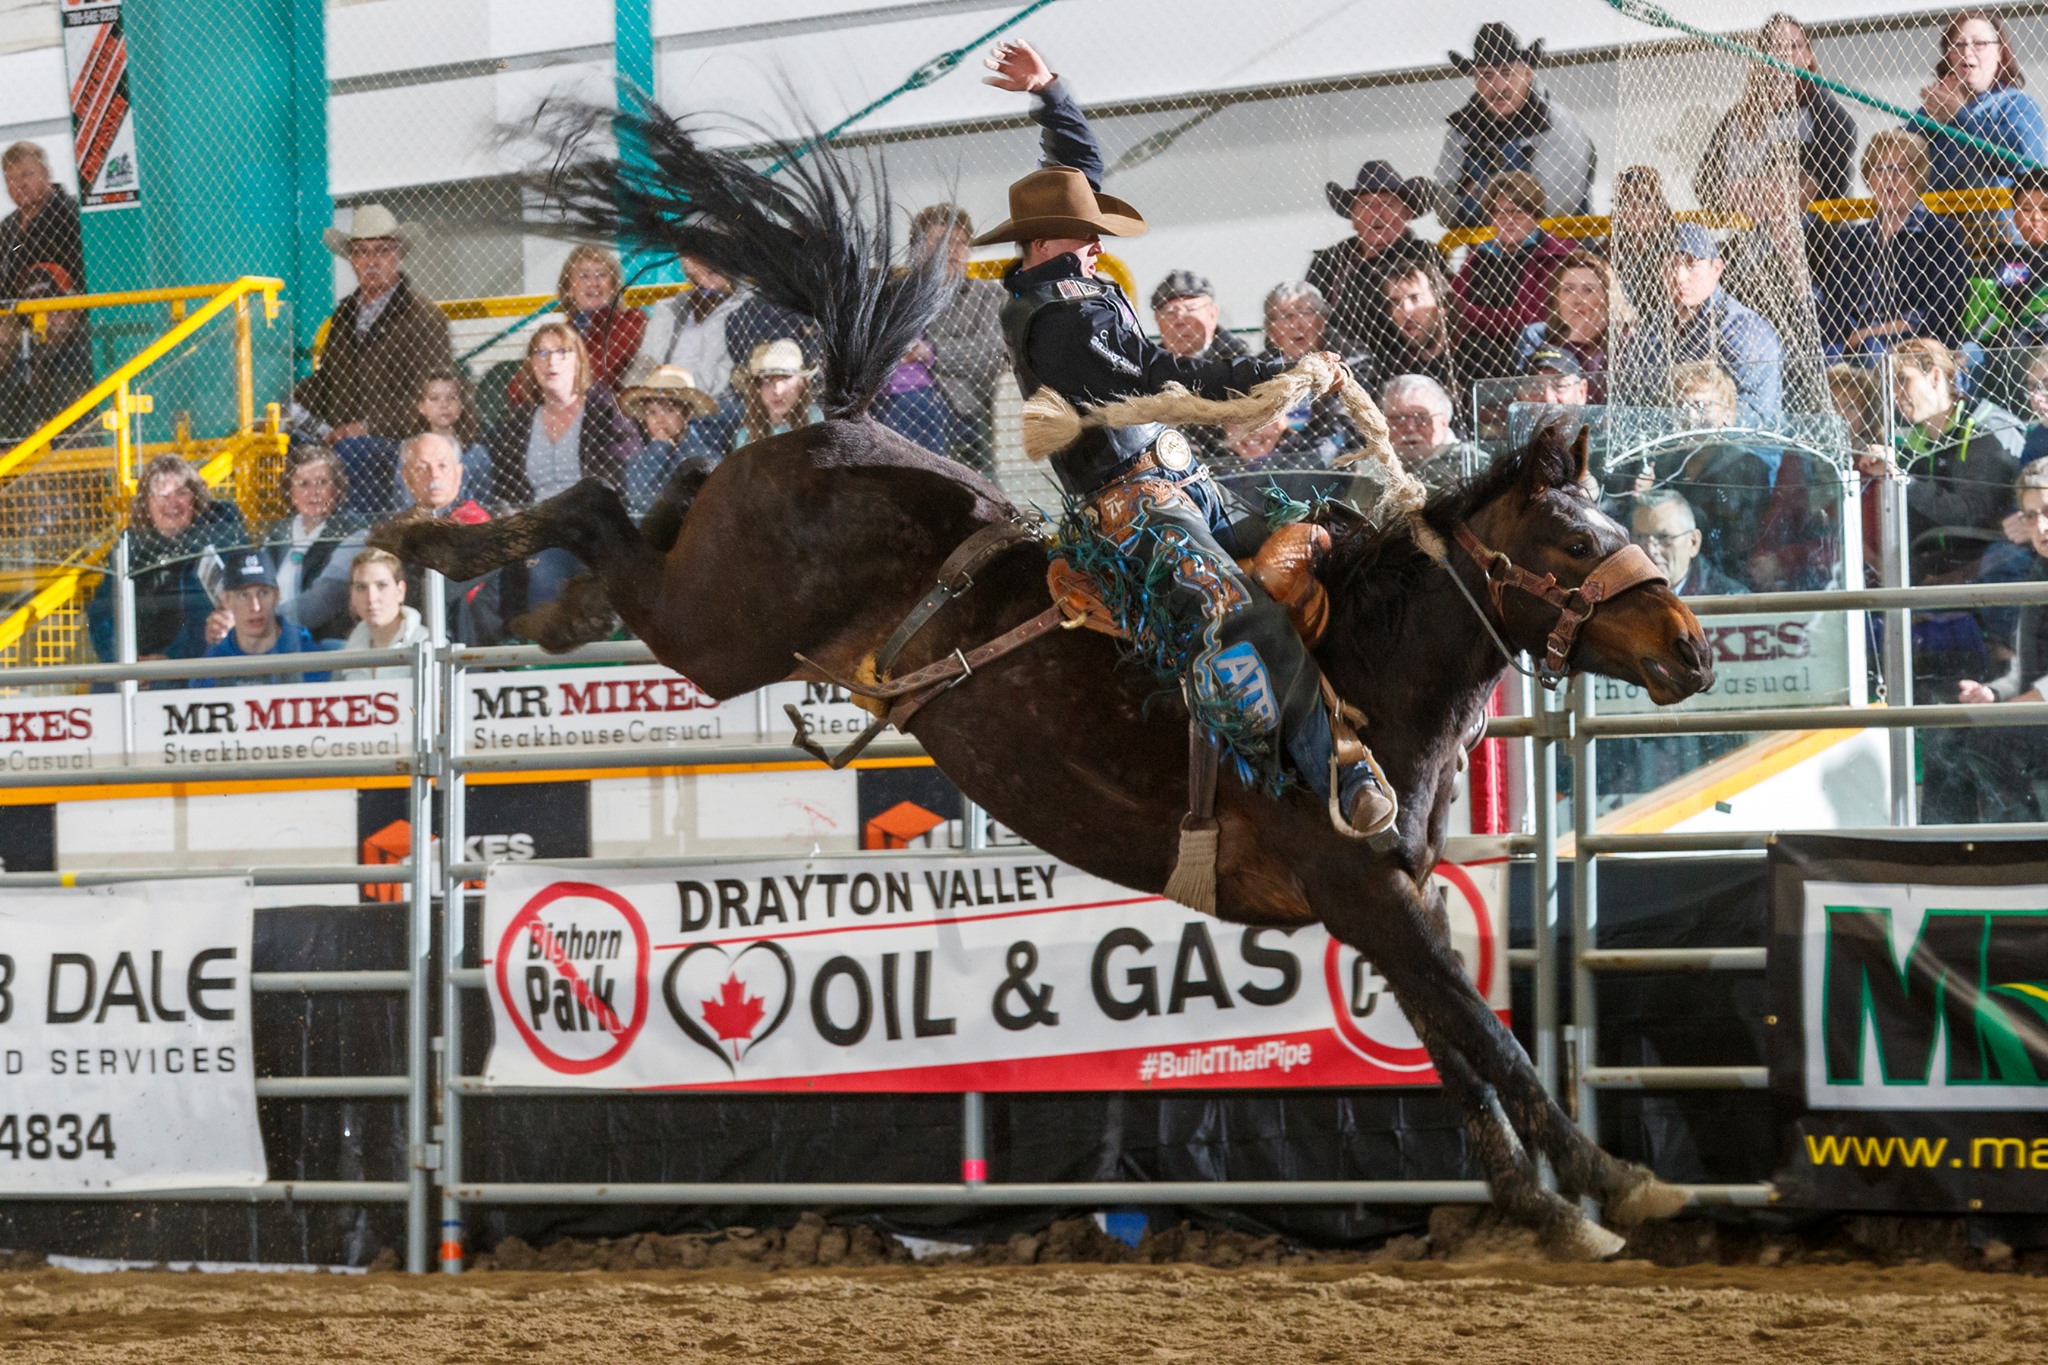 Drayton Valley Pro Rodeo Everyone's Western Experience